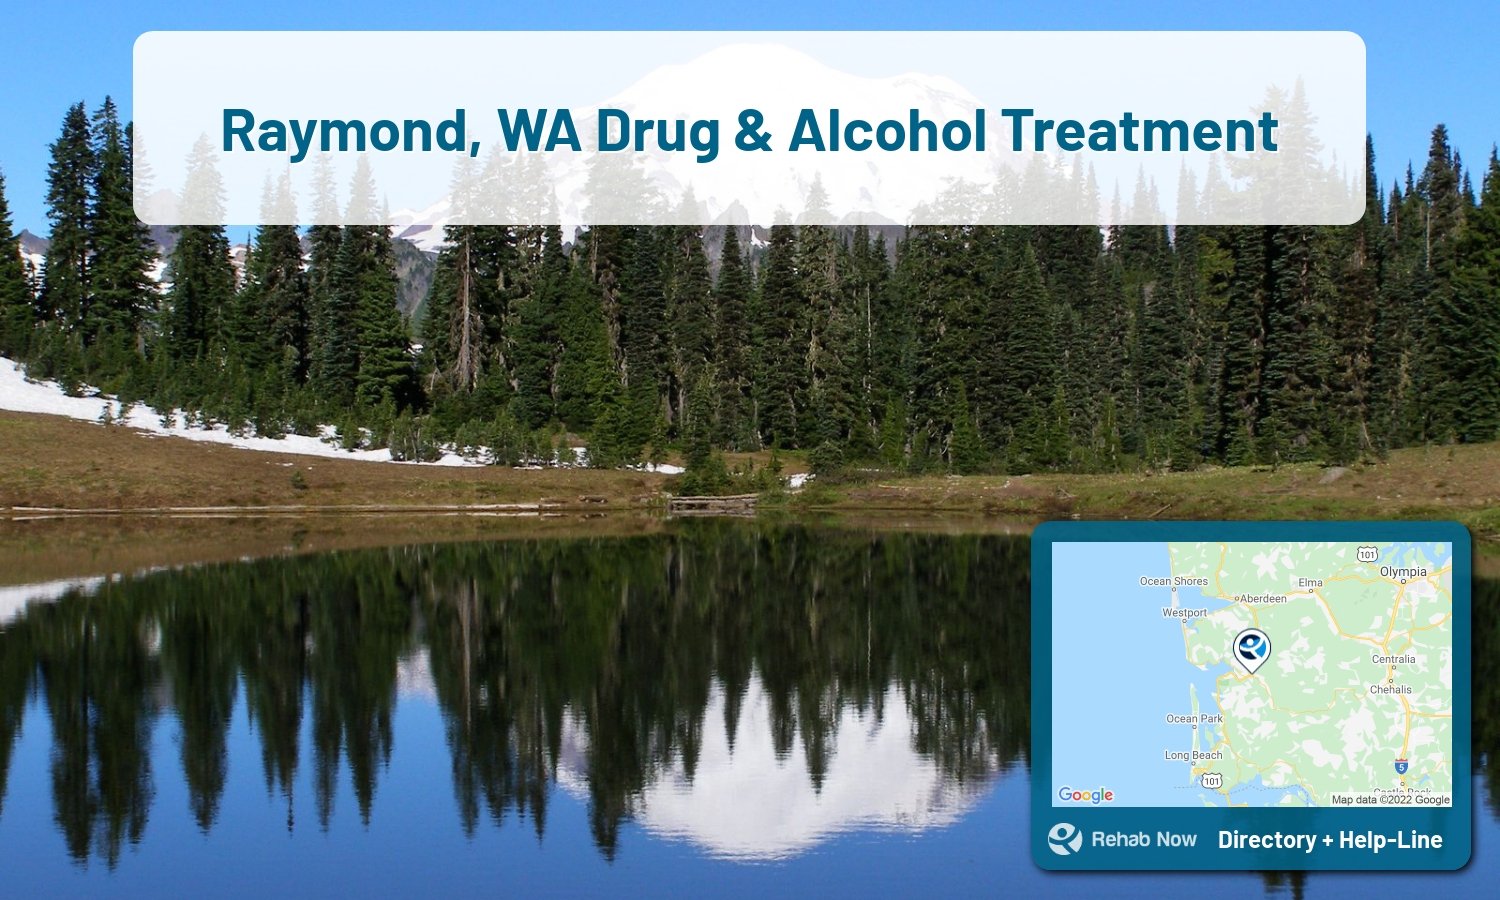 Raymond, WA Treatment Centers. Find drug rehab in Raymond, Washington, or detox and treatment programs. Get the right help now!